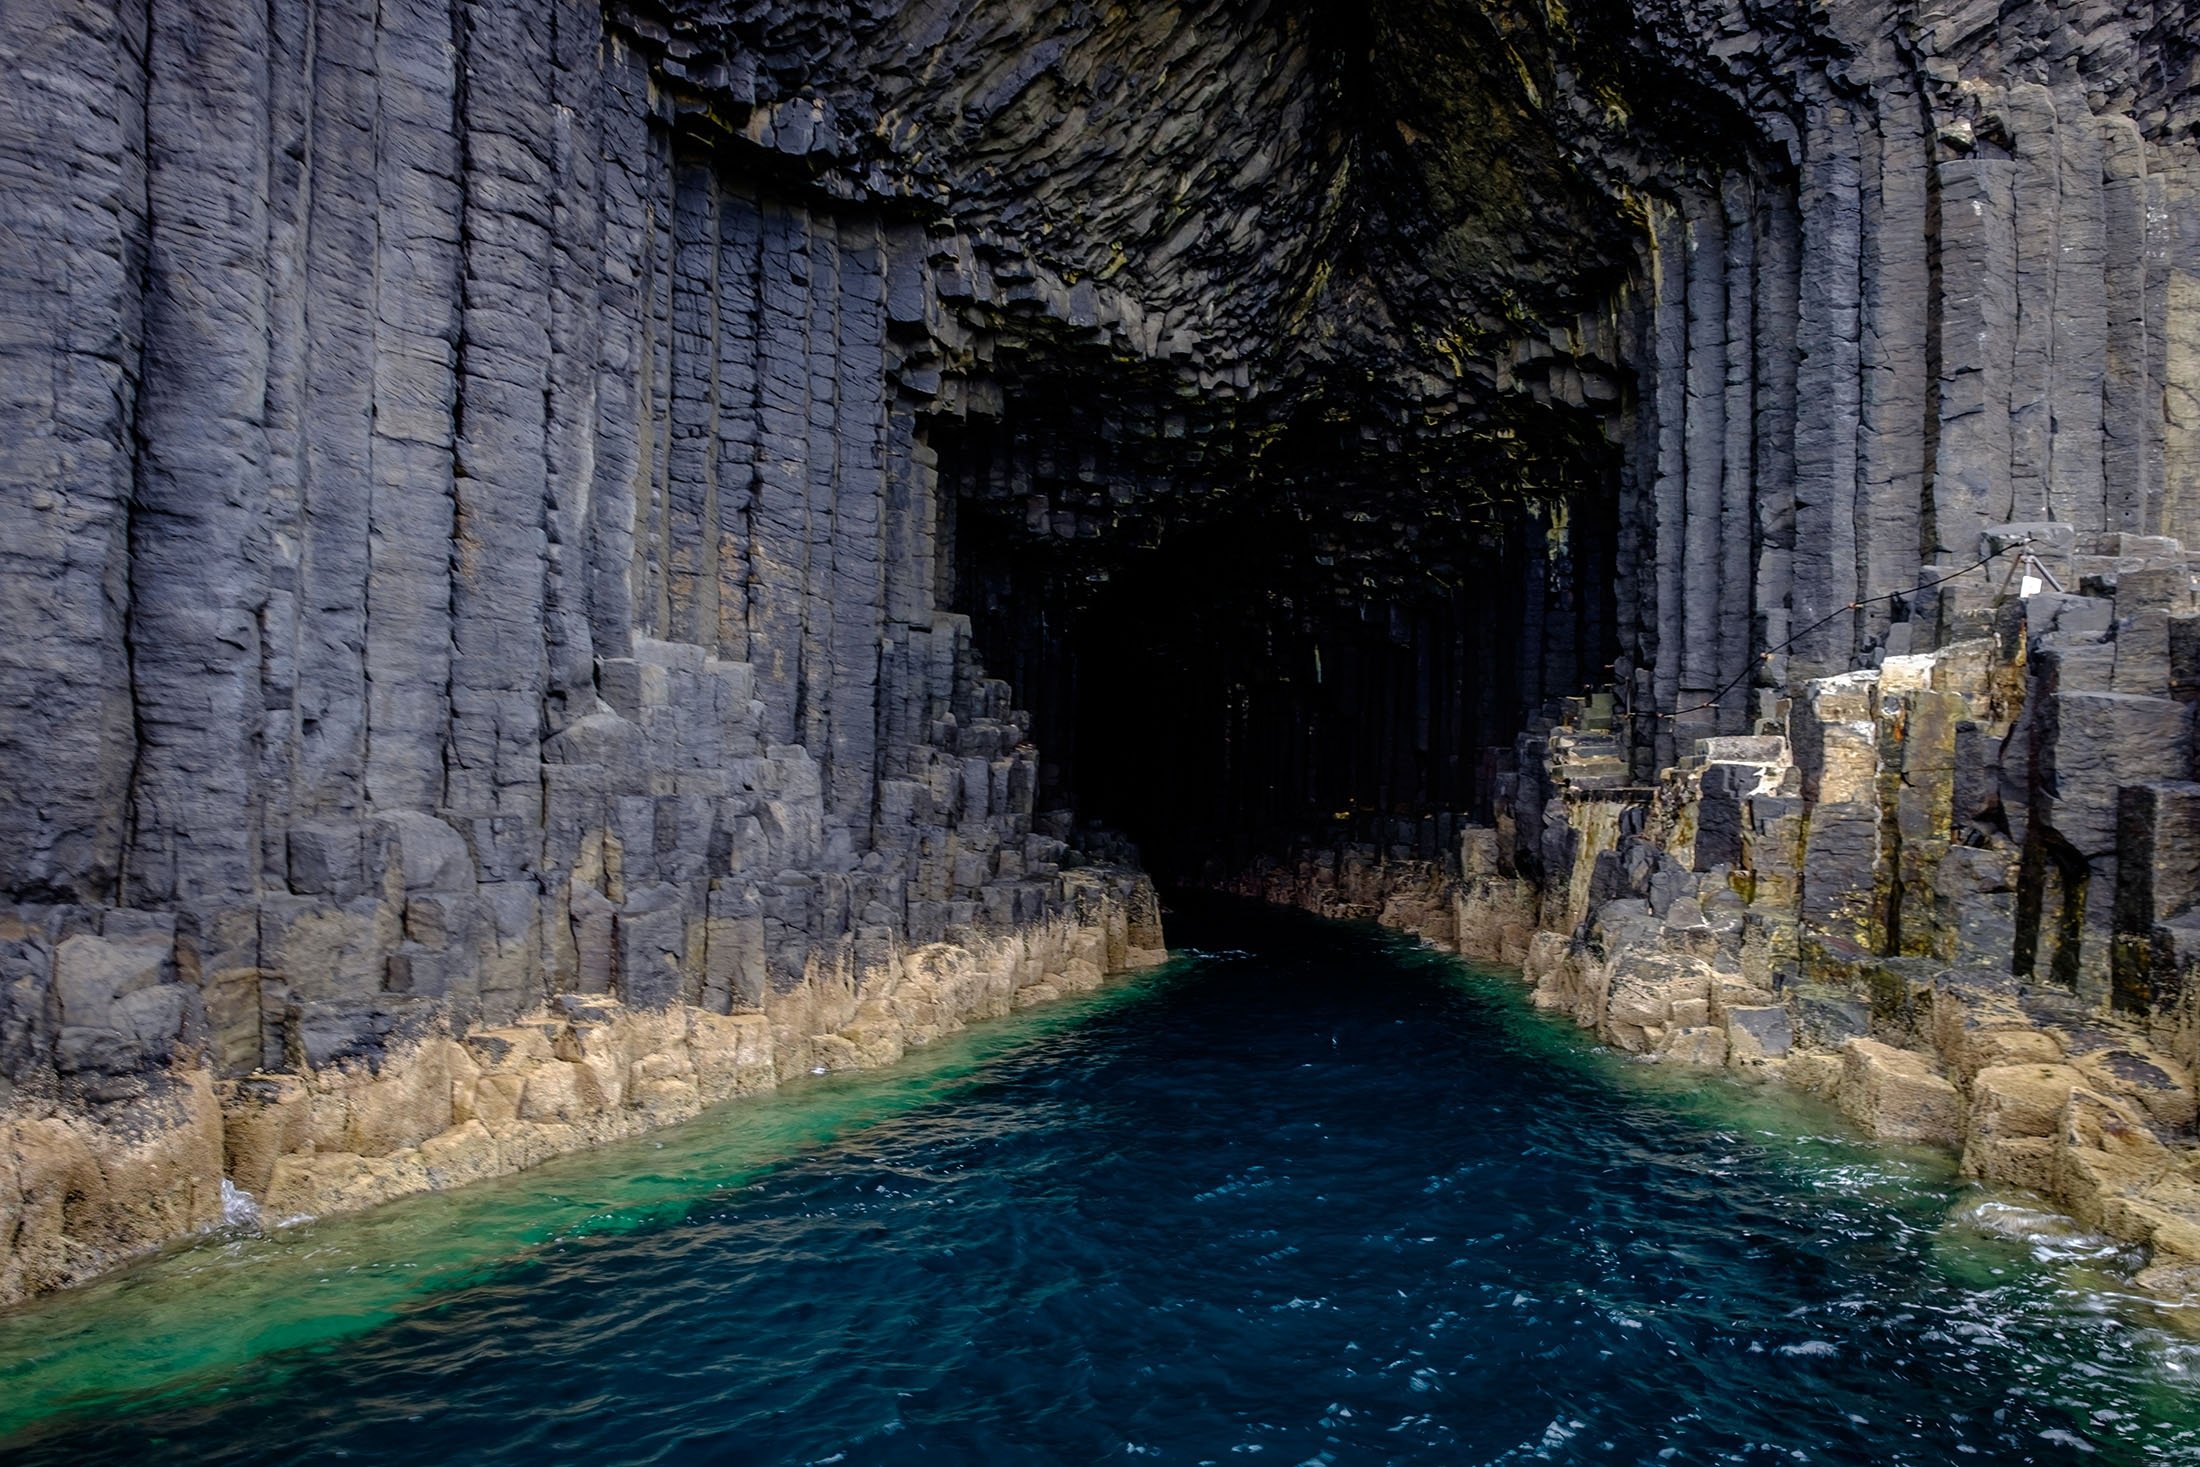 Fingal's Cave in Scotland has a wide arched entrance and is filled with seawater. (Photo Shutterstock)